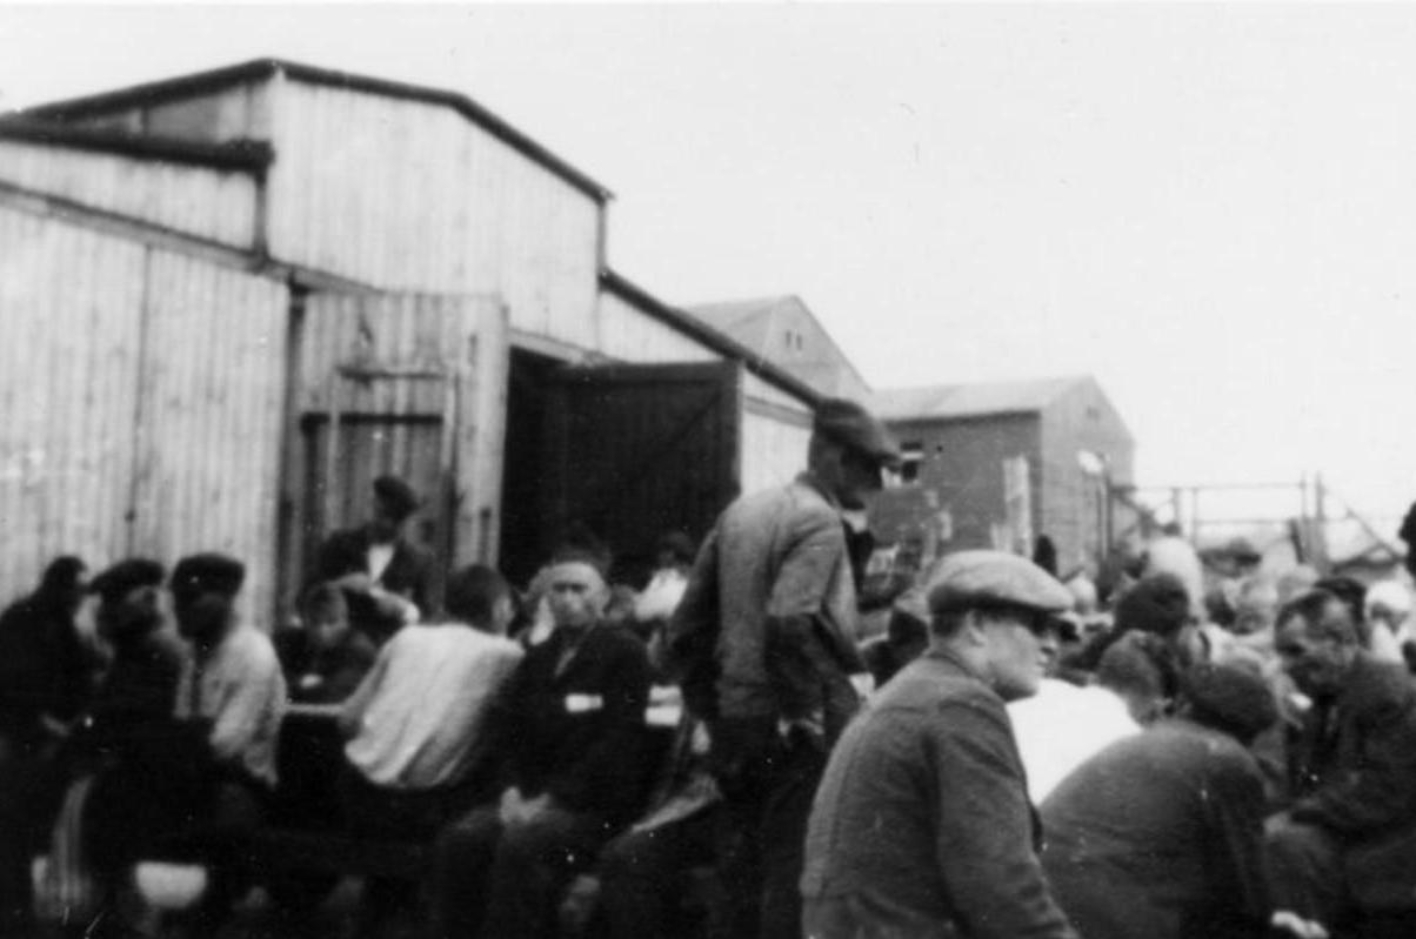 Prisoners of the Small Camp sit and stand close together in front of the open gate of a horse stable barrack. This is Block 51. Behind it, the stone buildings of Blocks 46 and 41.